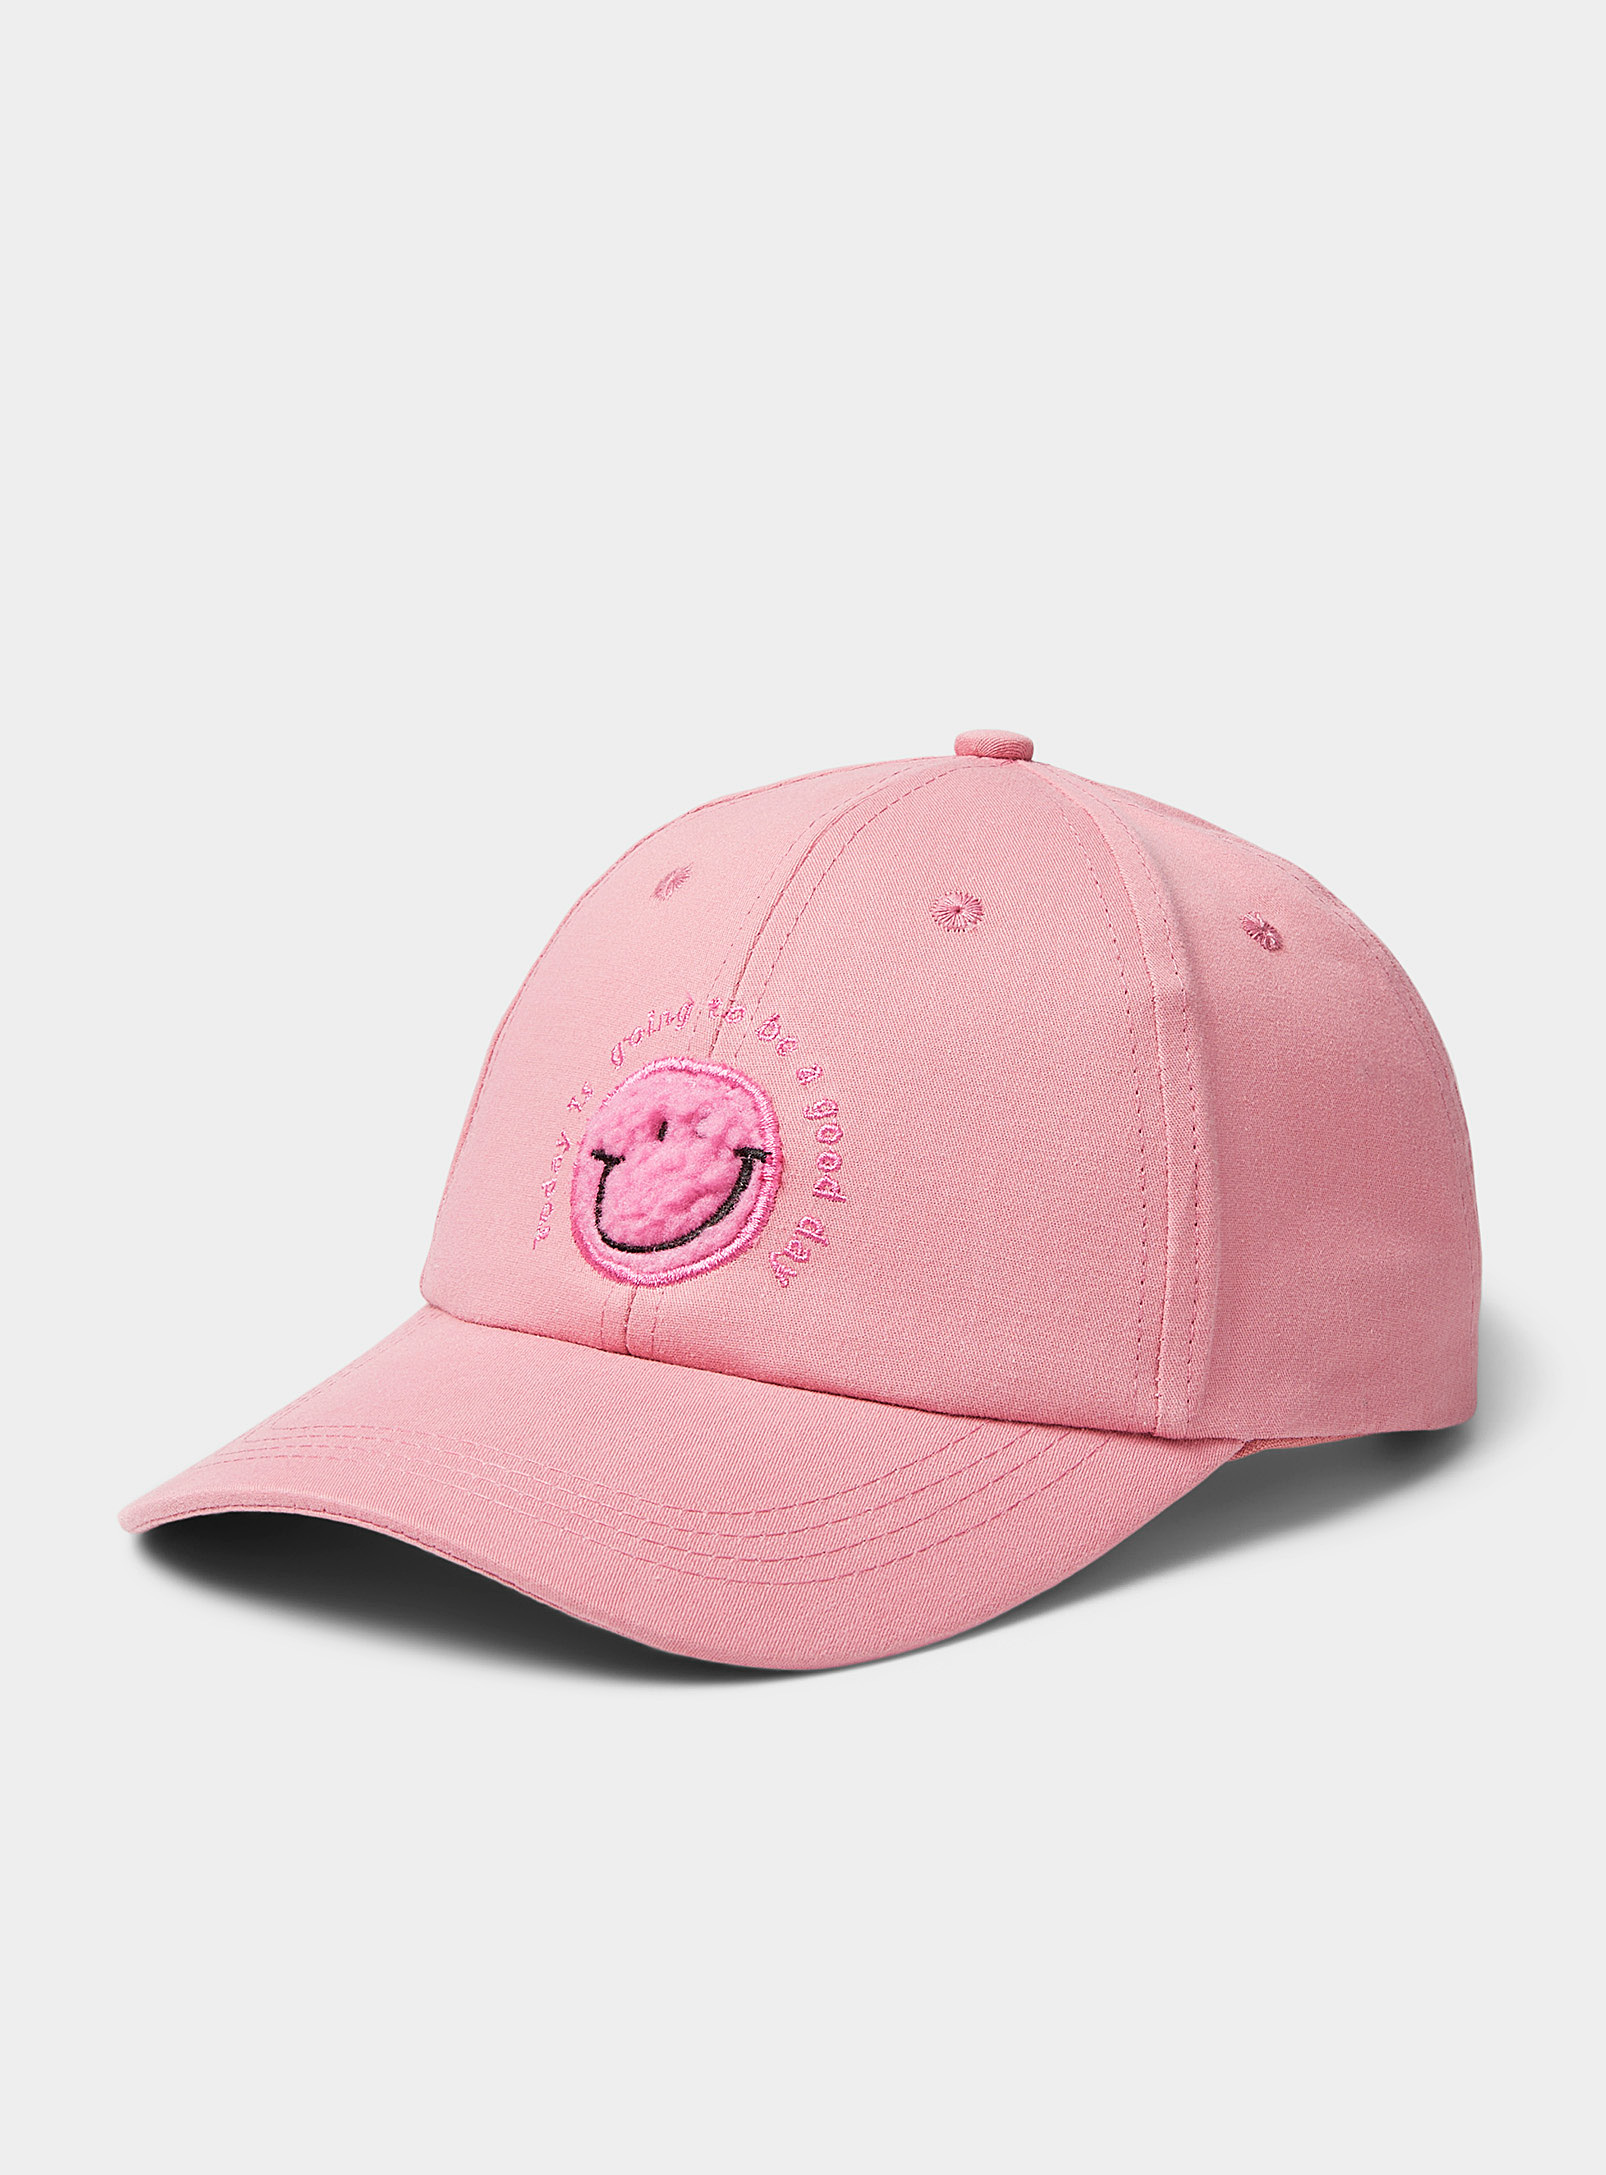 Nana The Brand Positive Embroidery Cap In Pink